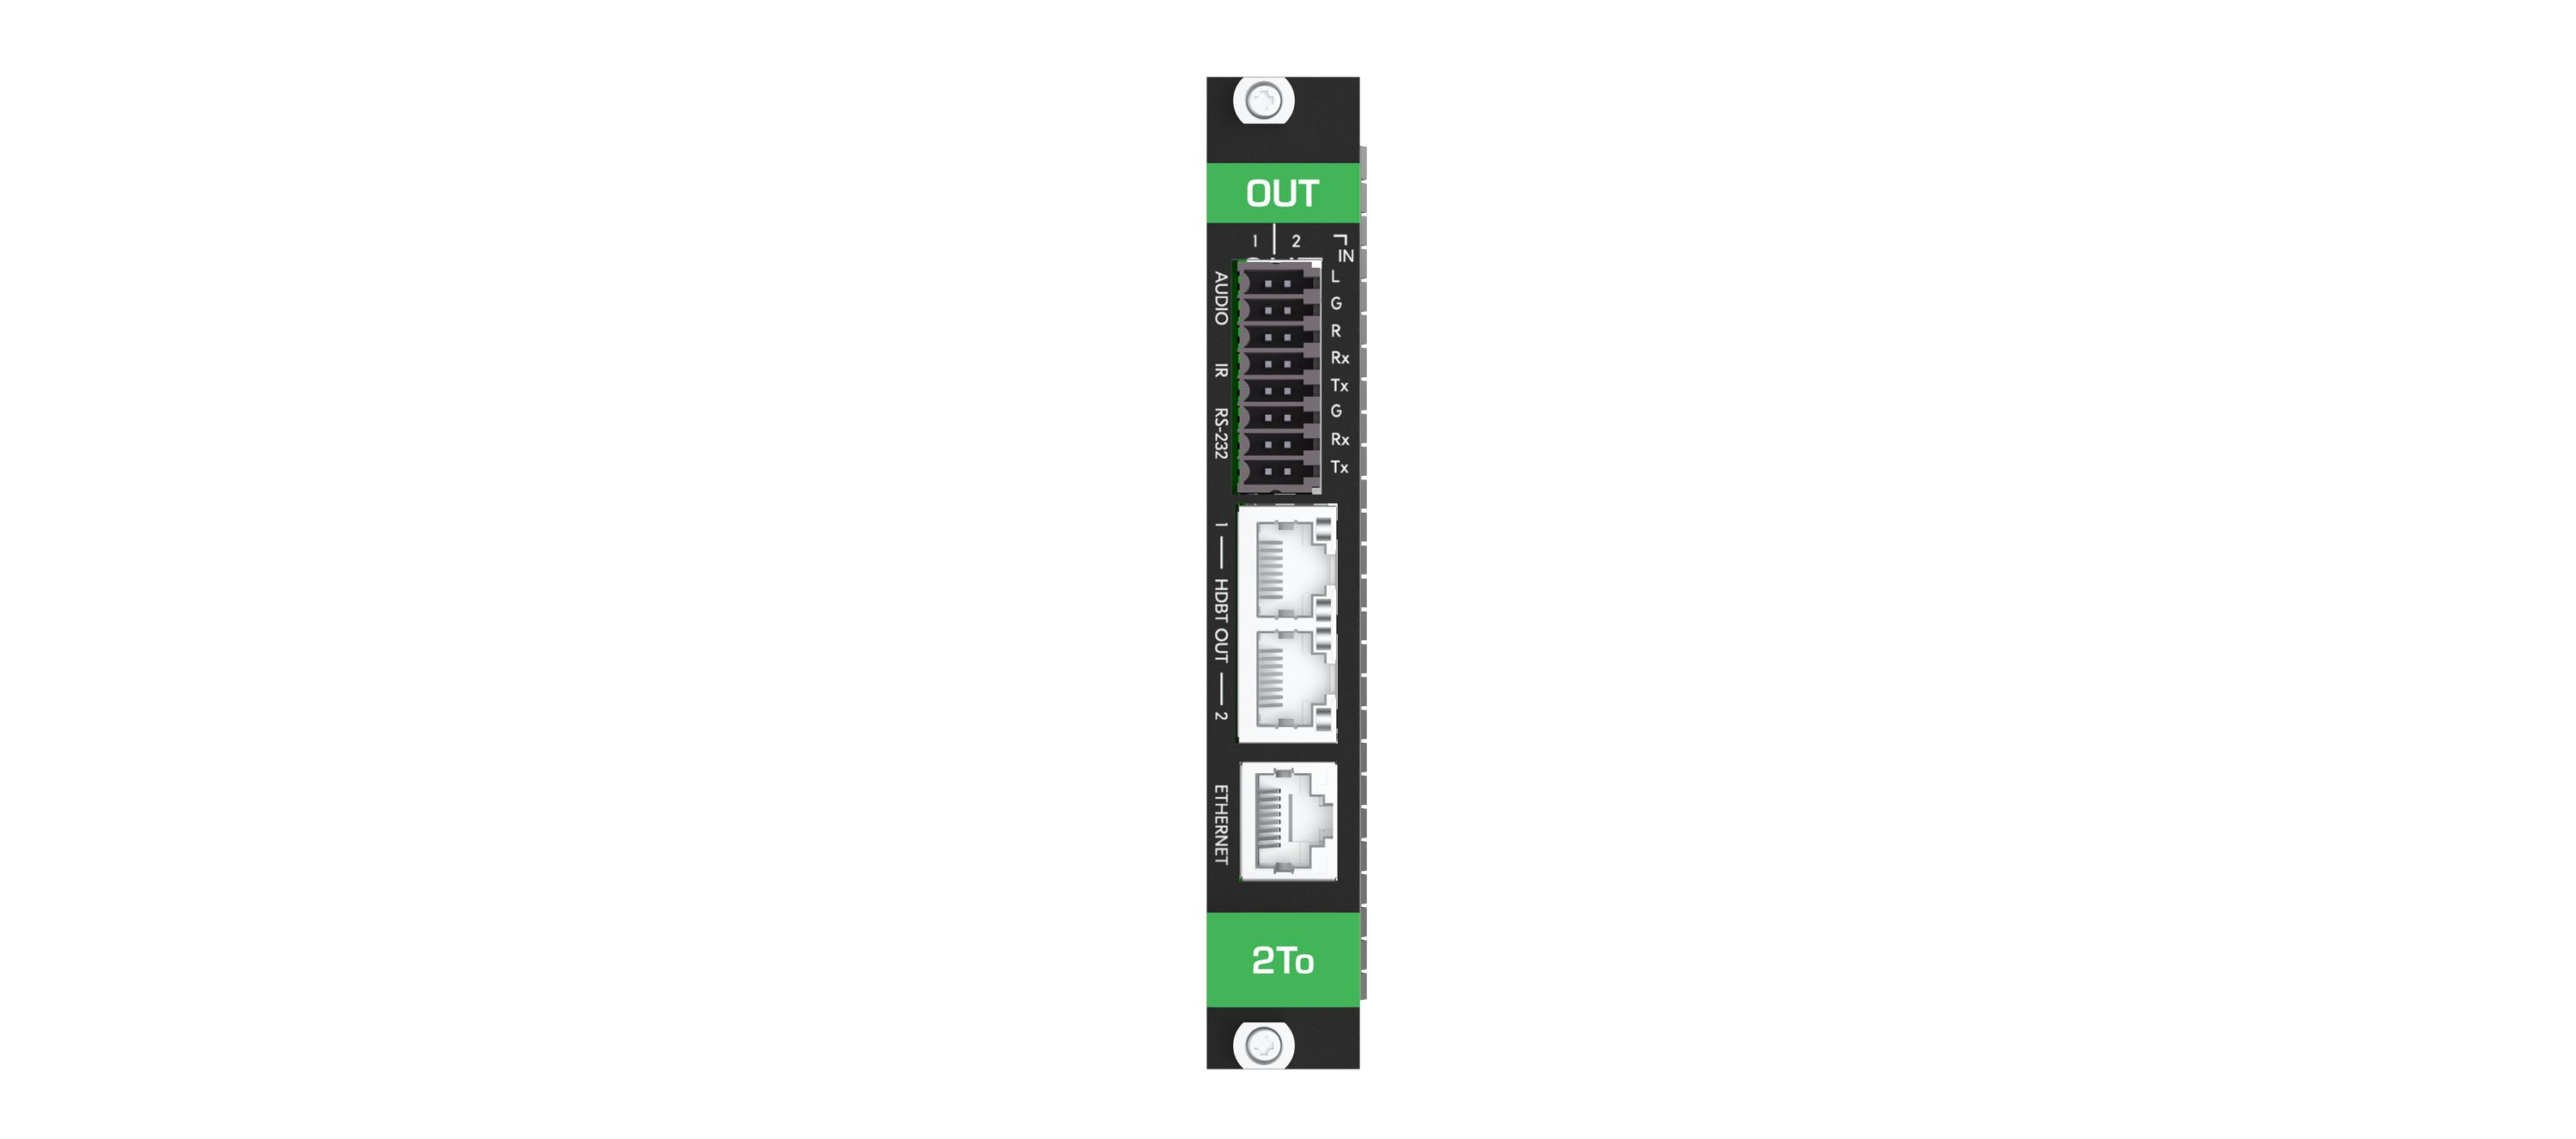 MC3-2To 4K60 HDBT 2xOUT Card with Analog Audio